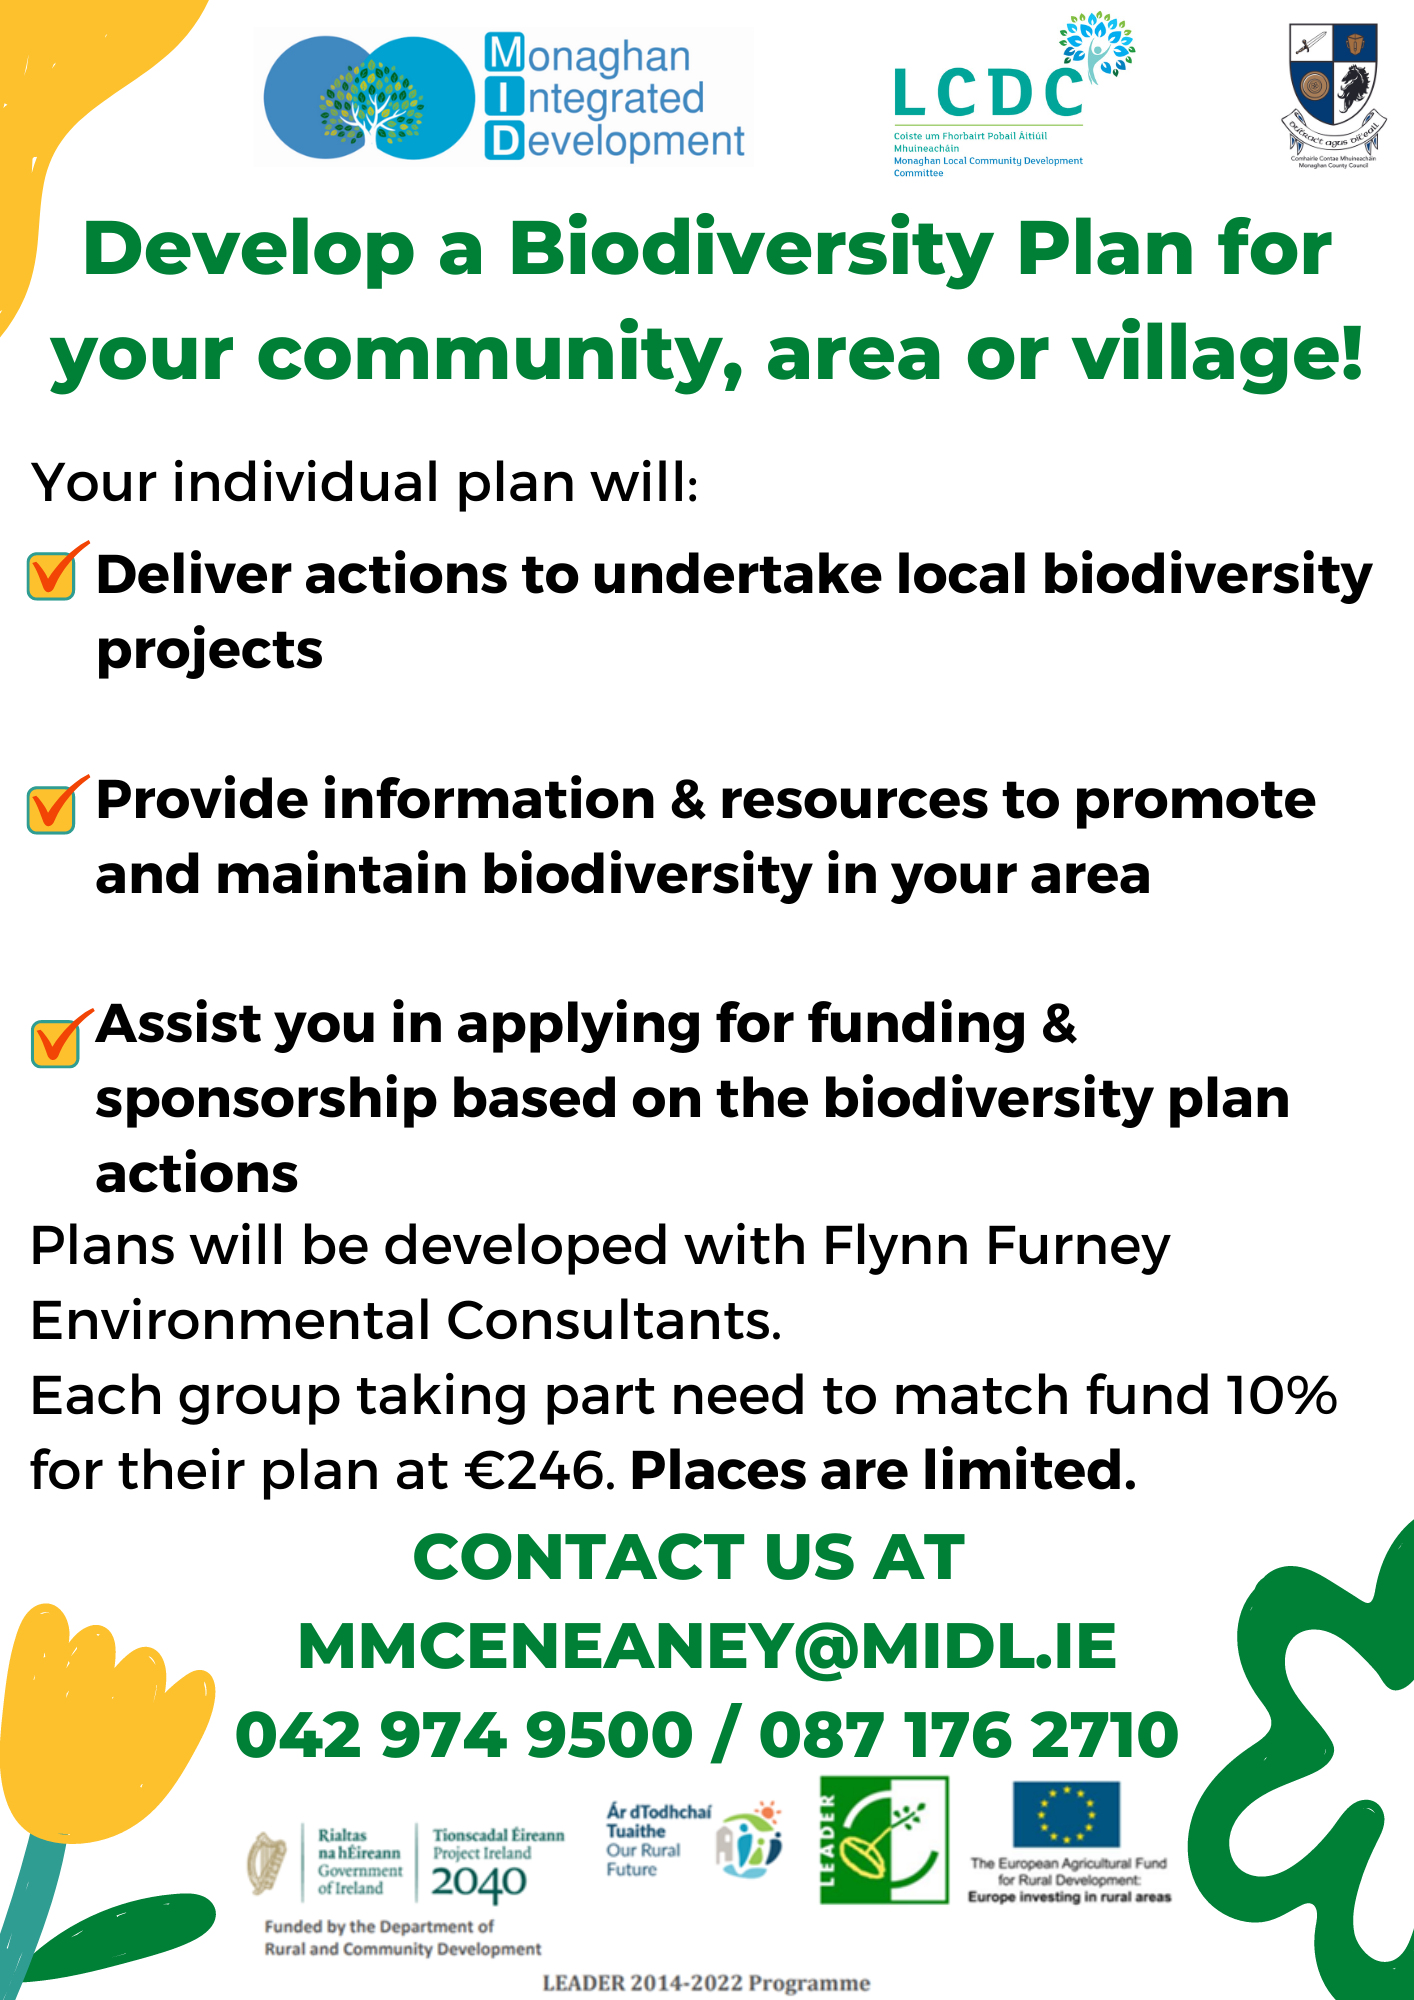 Develop a Biodiversity Plan for your community, area or village with Flynn Furney Environmental Consultants!